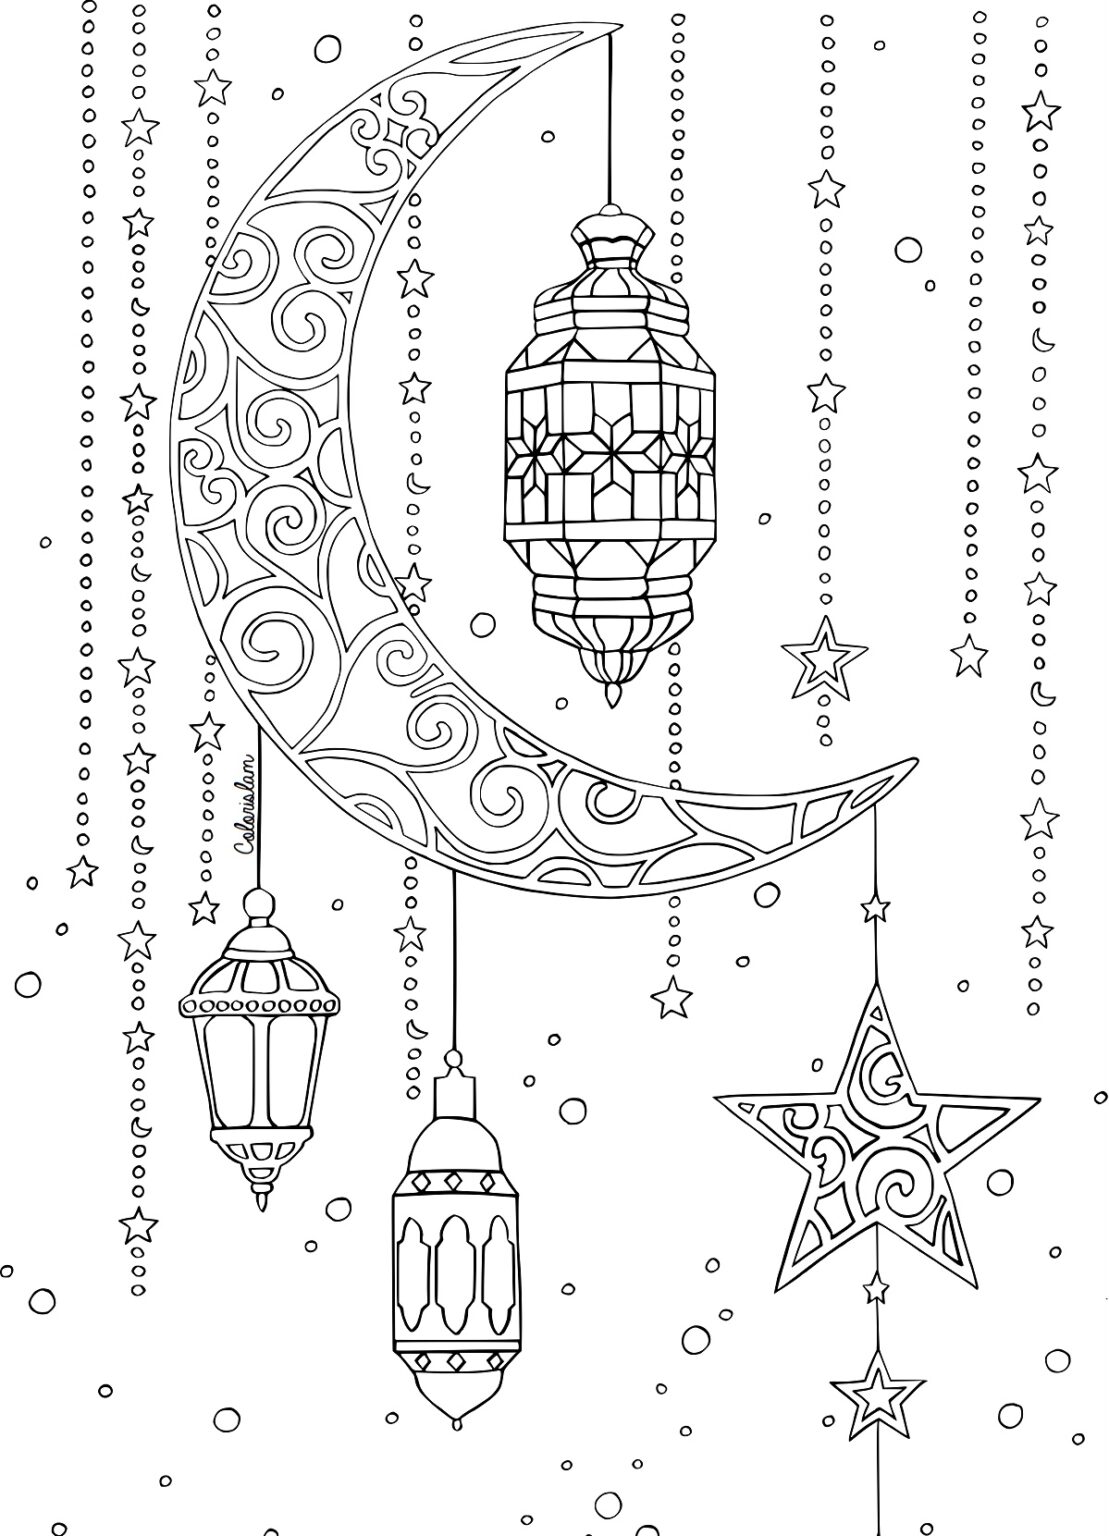 ramadan-coloring-book-coloring-pages